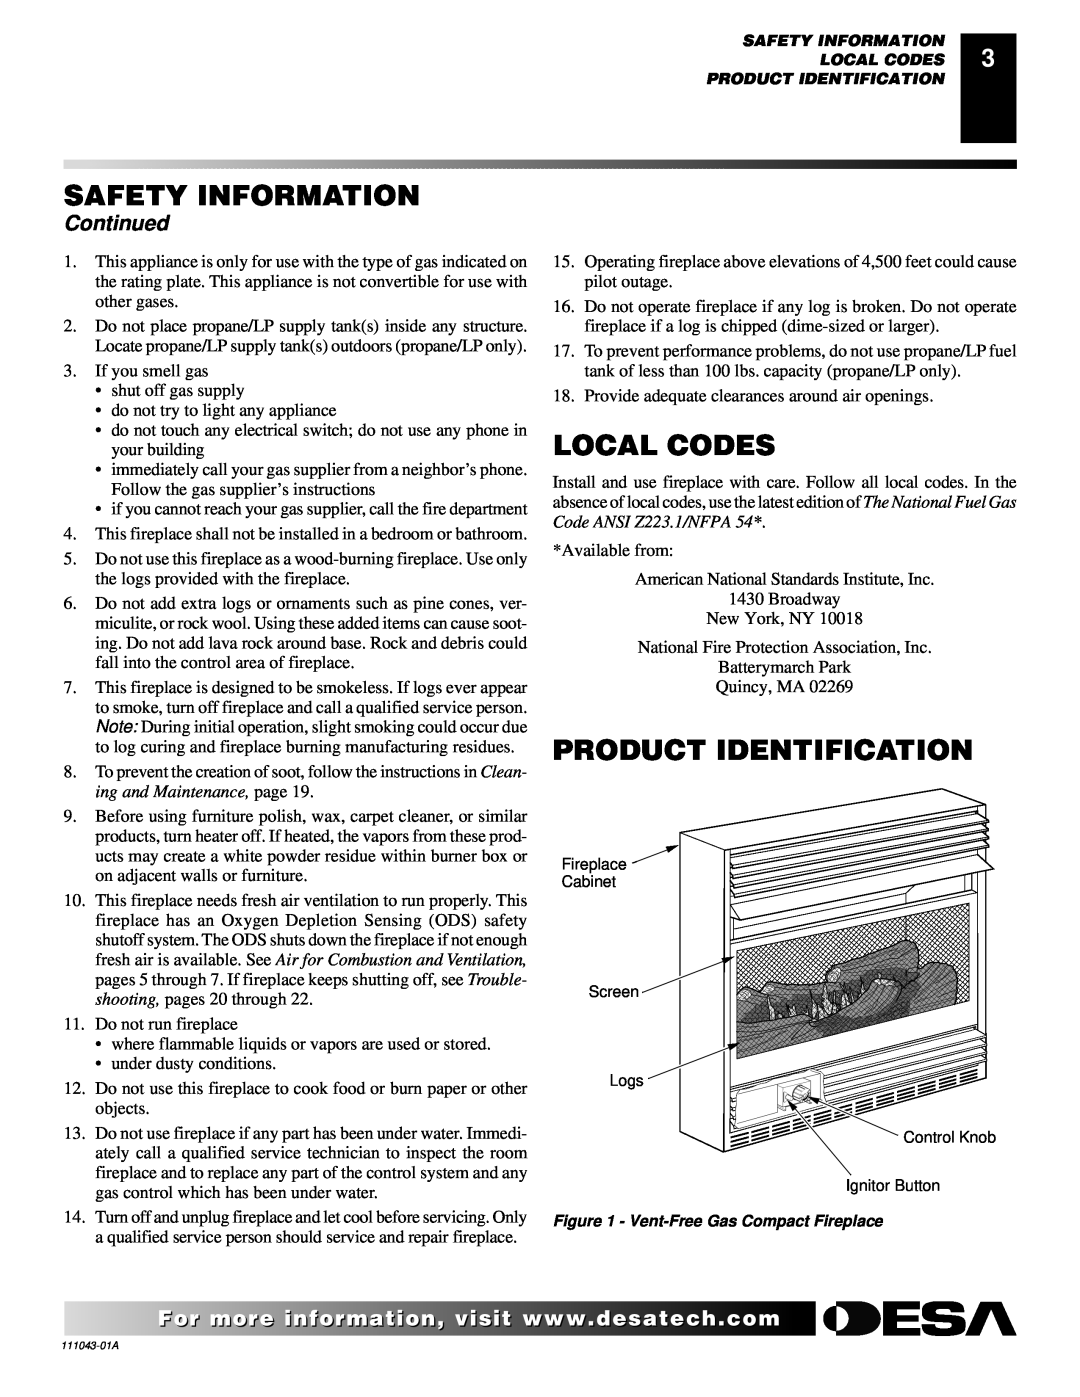 Vanguard Heating WMH26TNB installation manual Local Codes, Product Identification, Continued, Safety Information 